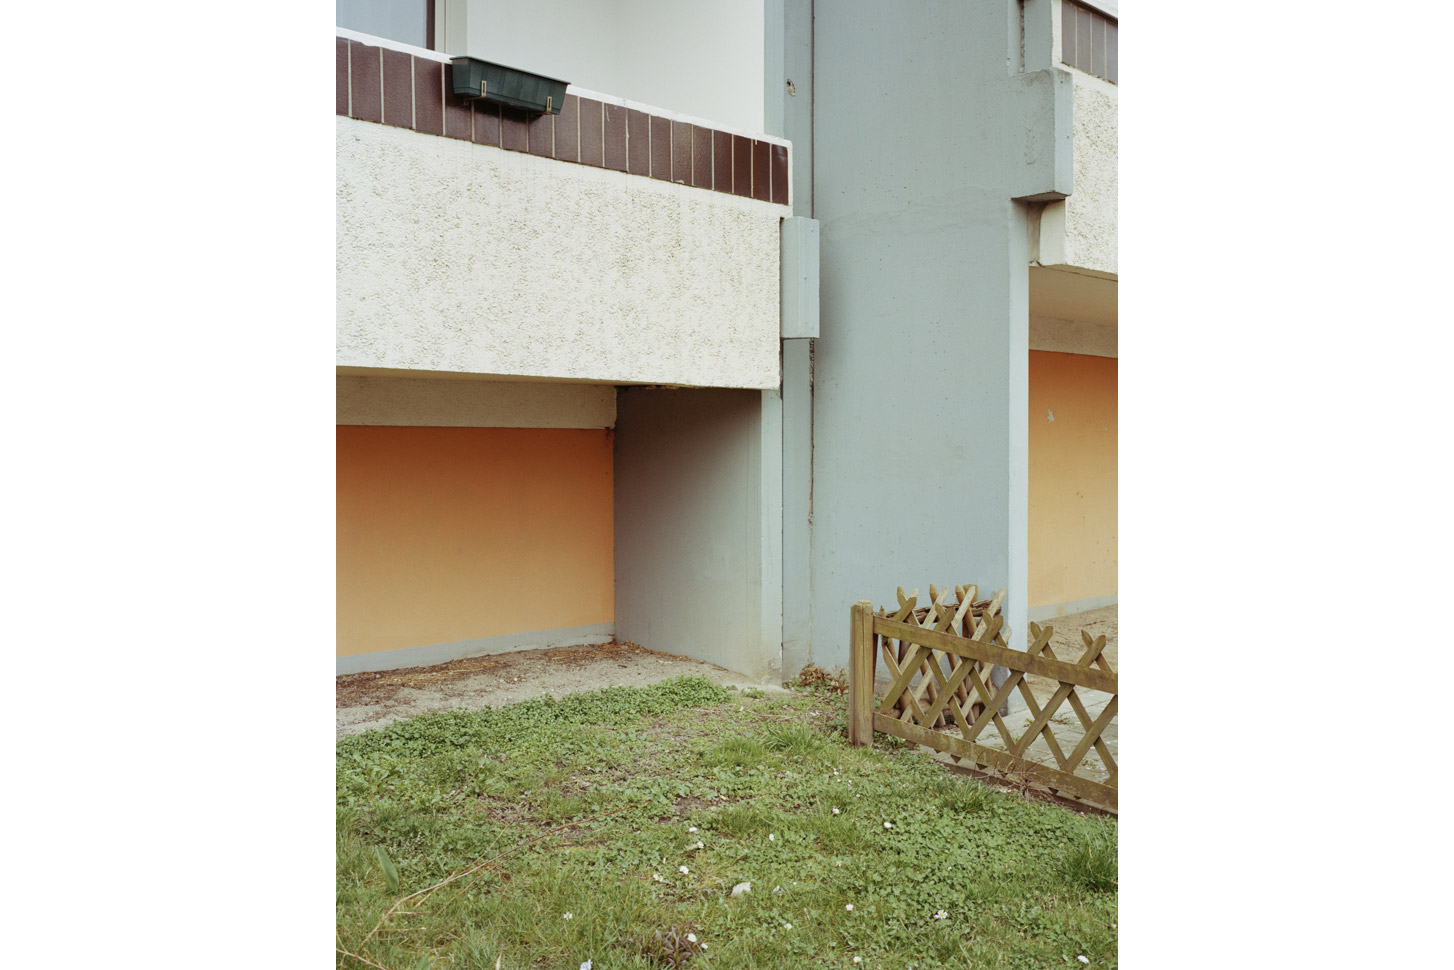 Fictional Spaces at Acht Tage Marzahn